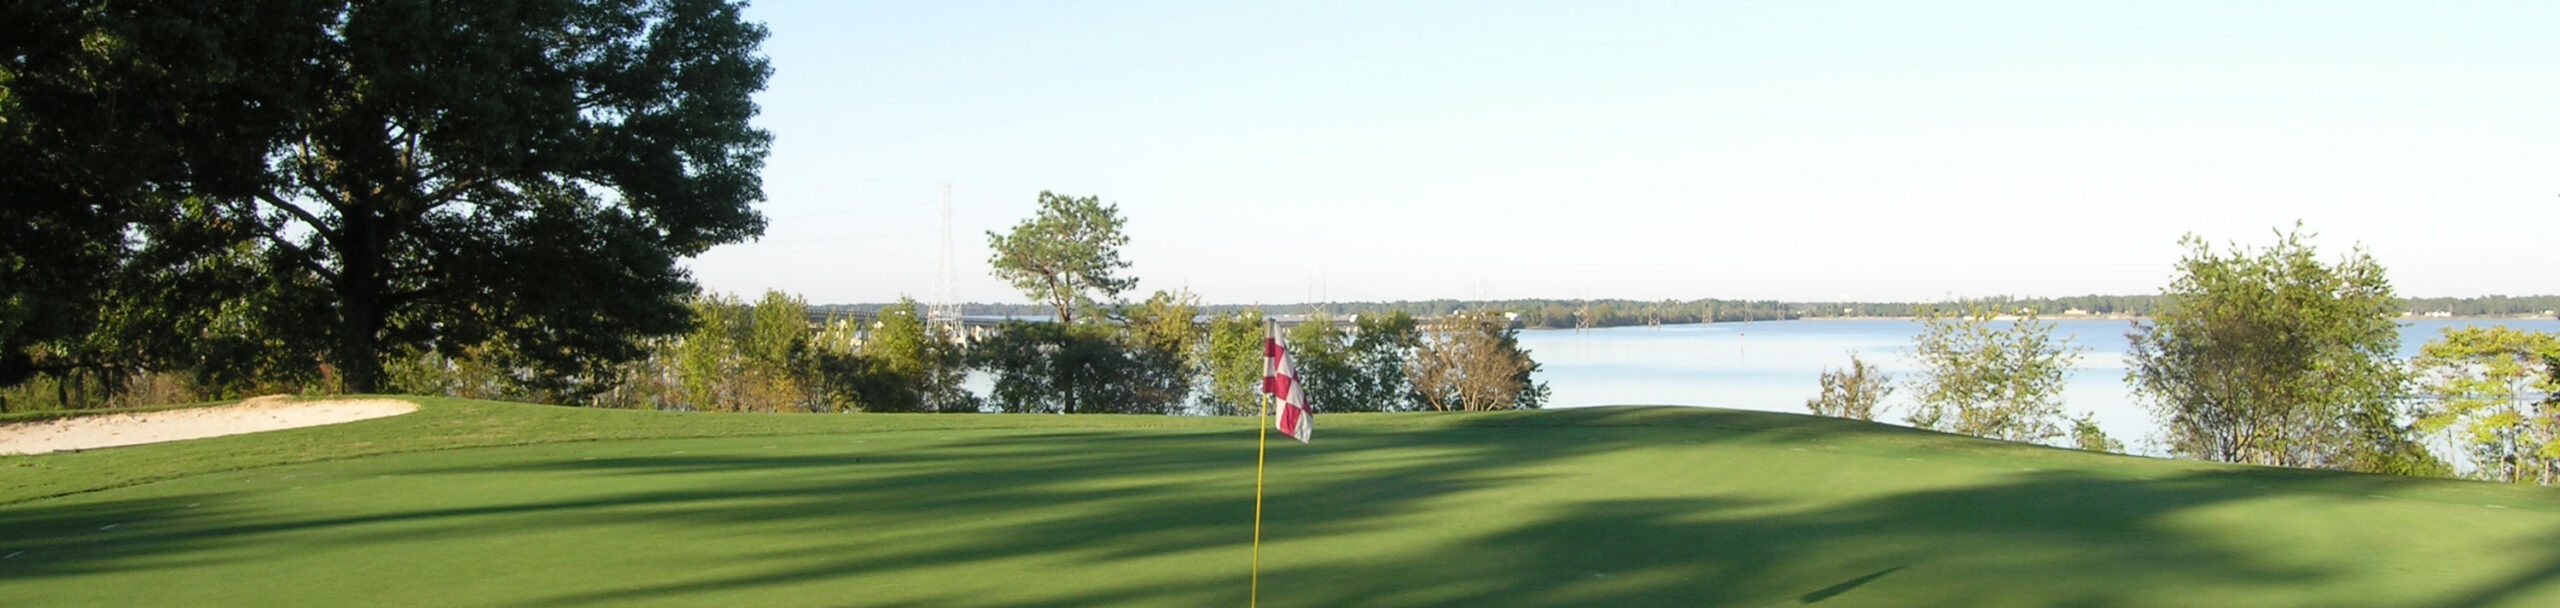 golf course hole overlooking the lake